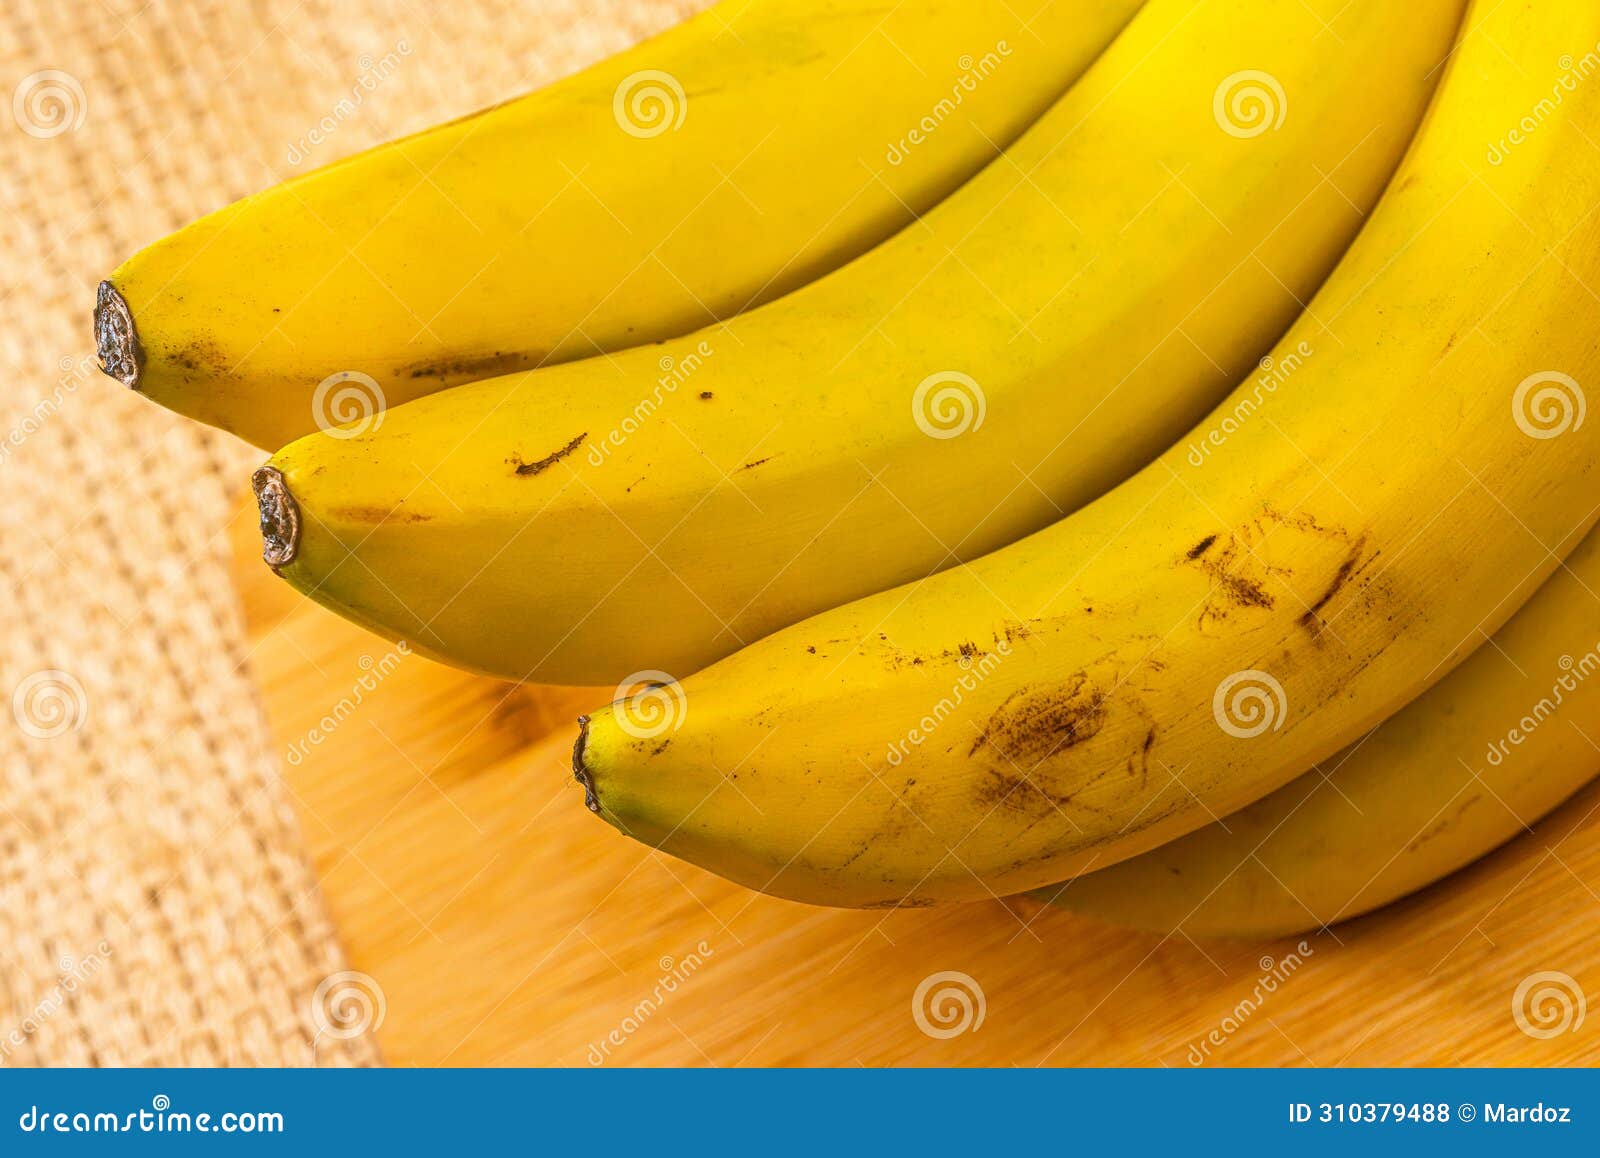 bananas with yute texture in the background